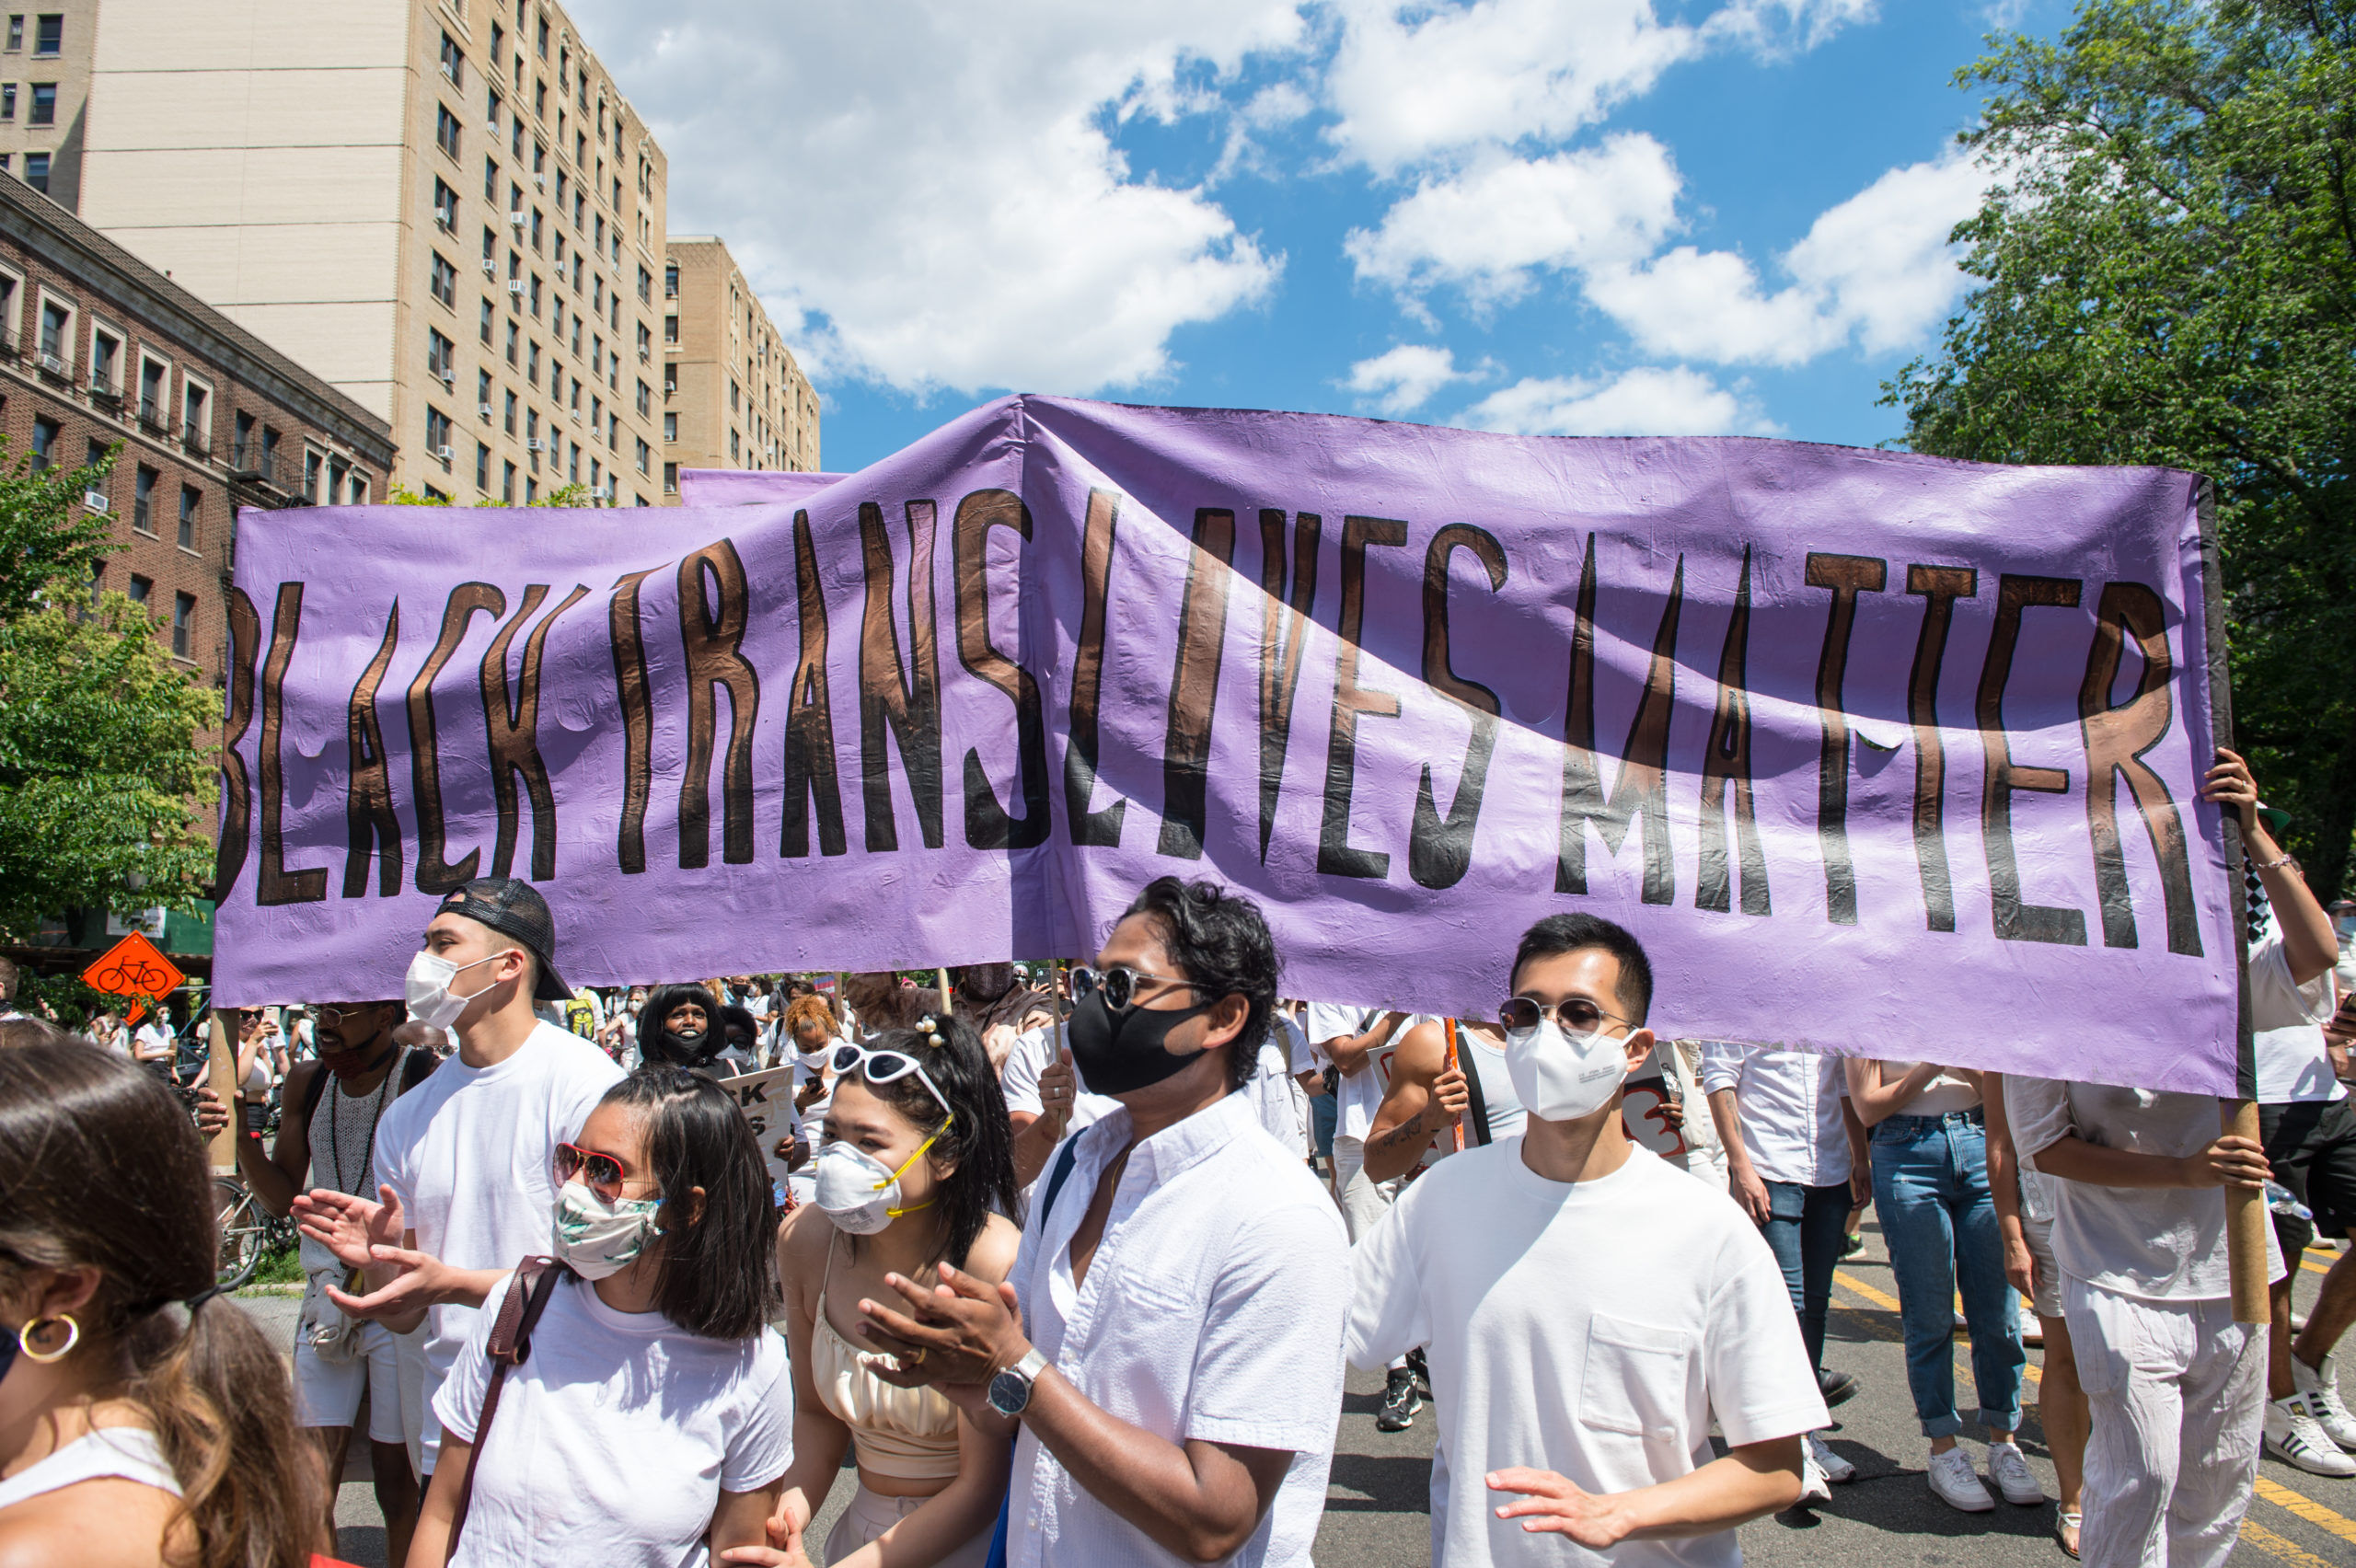 The Brookyn Liberation - An Action for Black Trans Lives Protest held in Brooklyn, New York on June 14, 2020.